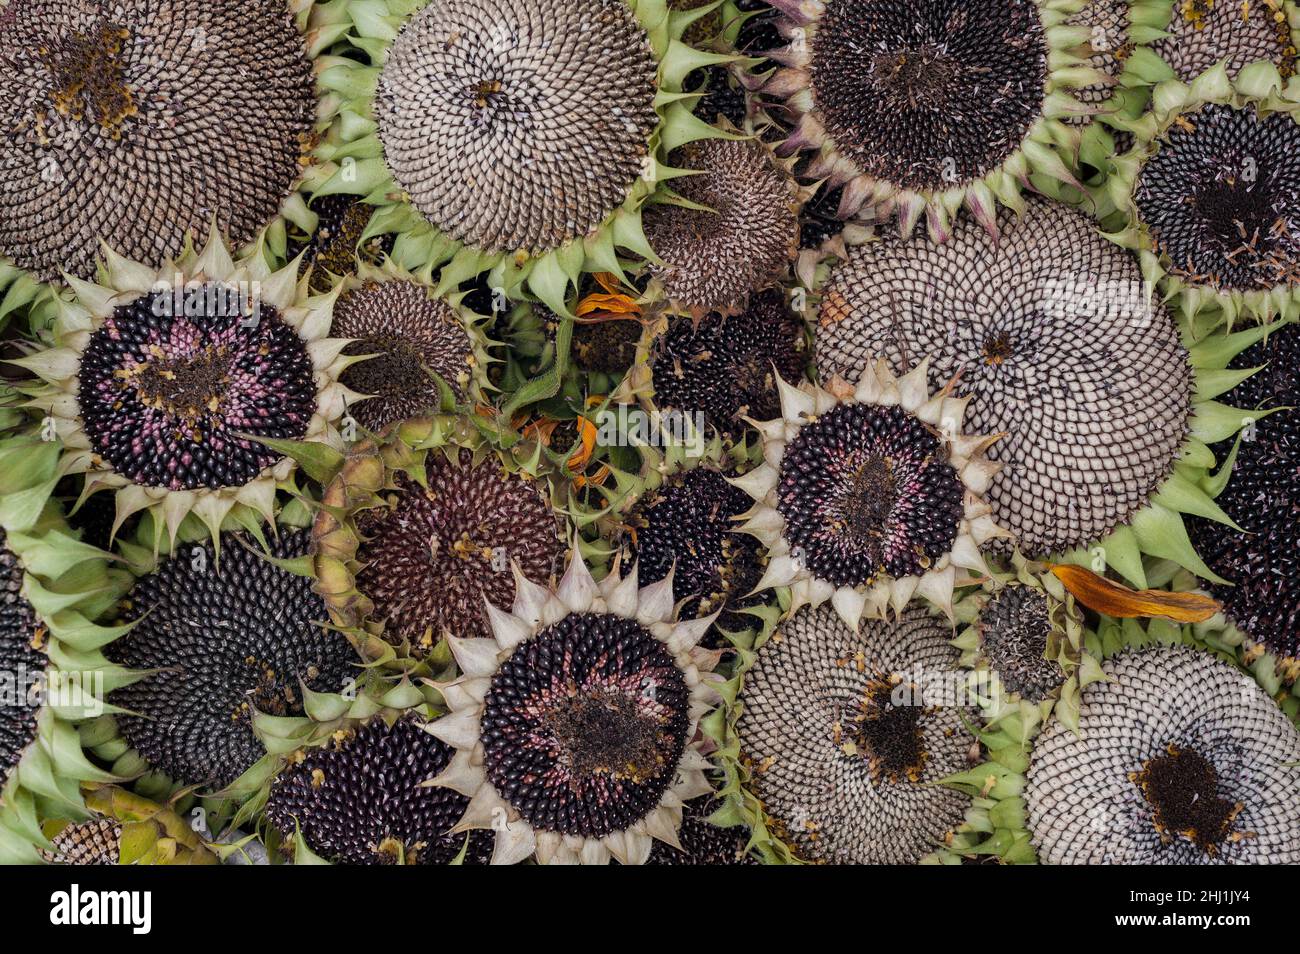 Mixture of F1 different varieties of cut sunflower heads drying out for experiment next year and surplus for bird seed, exposed seeds in pseudanthium Stock Photo